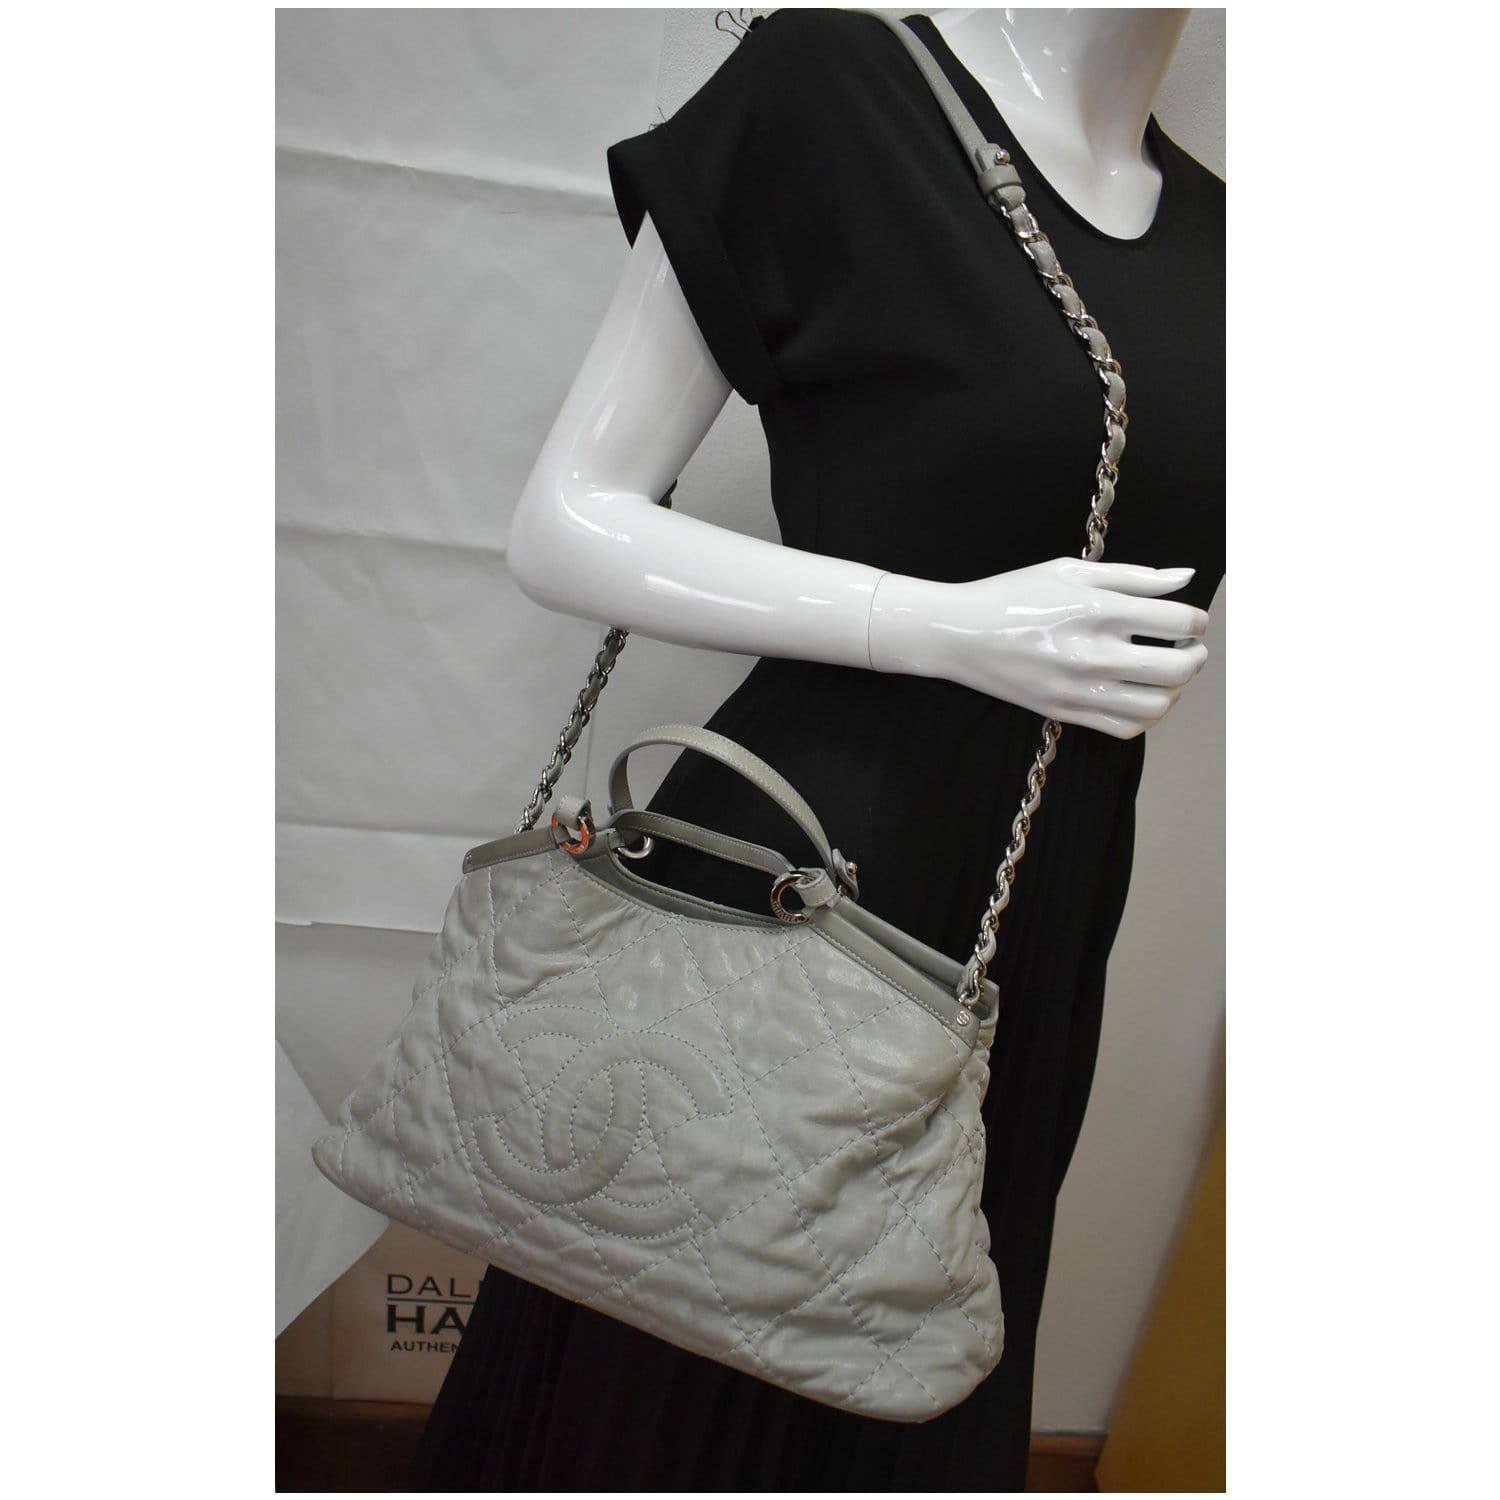 Natural Beige Tote Bag with Quilted Wild Stitch Leather and Black Contrast  Stitching, 2000-2002, Holiday Handbags & Accessories, 2020